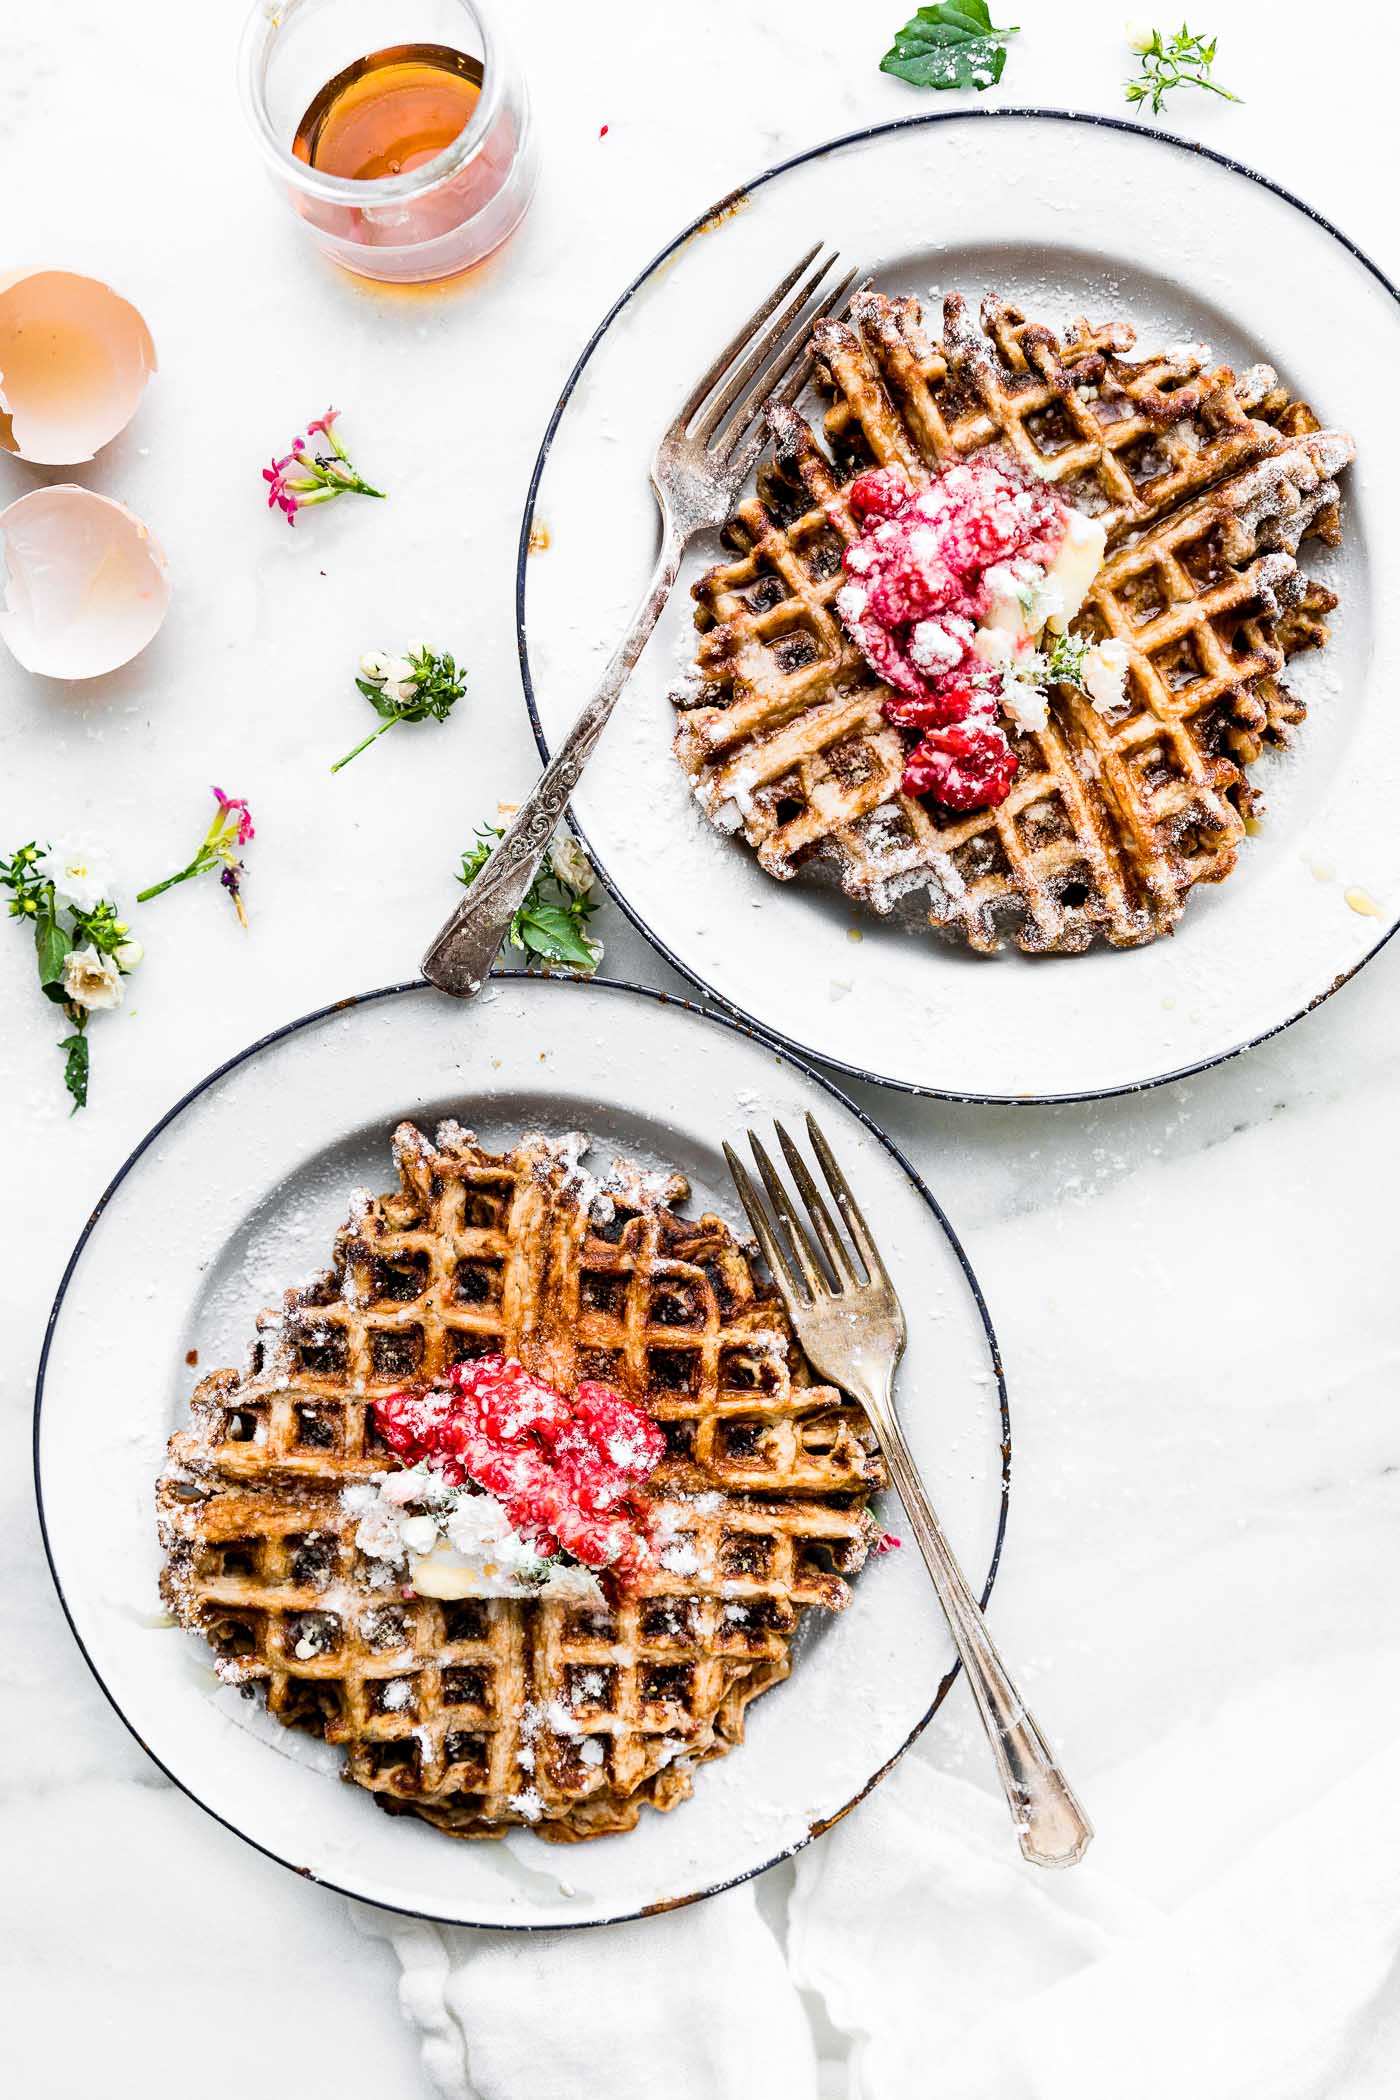 Paleo waffles, golden brown, on white plates topped with berries, butter, and maple syrup.